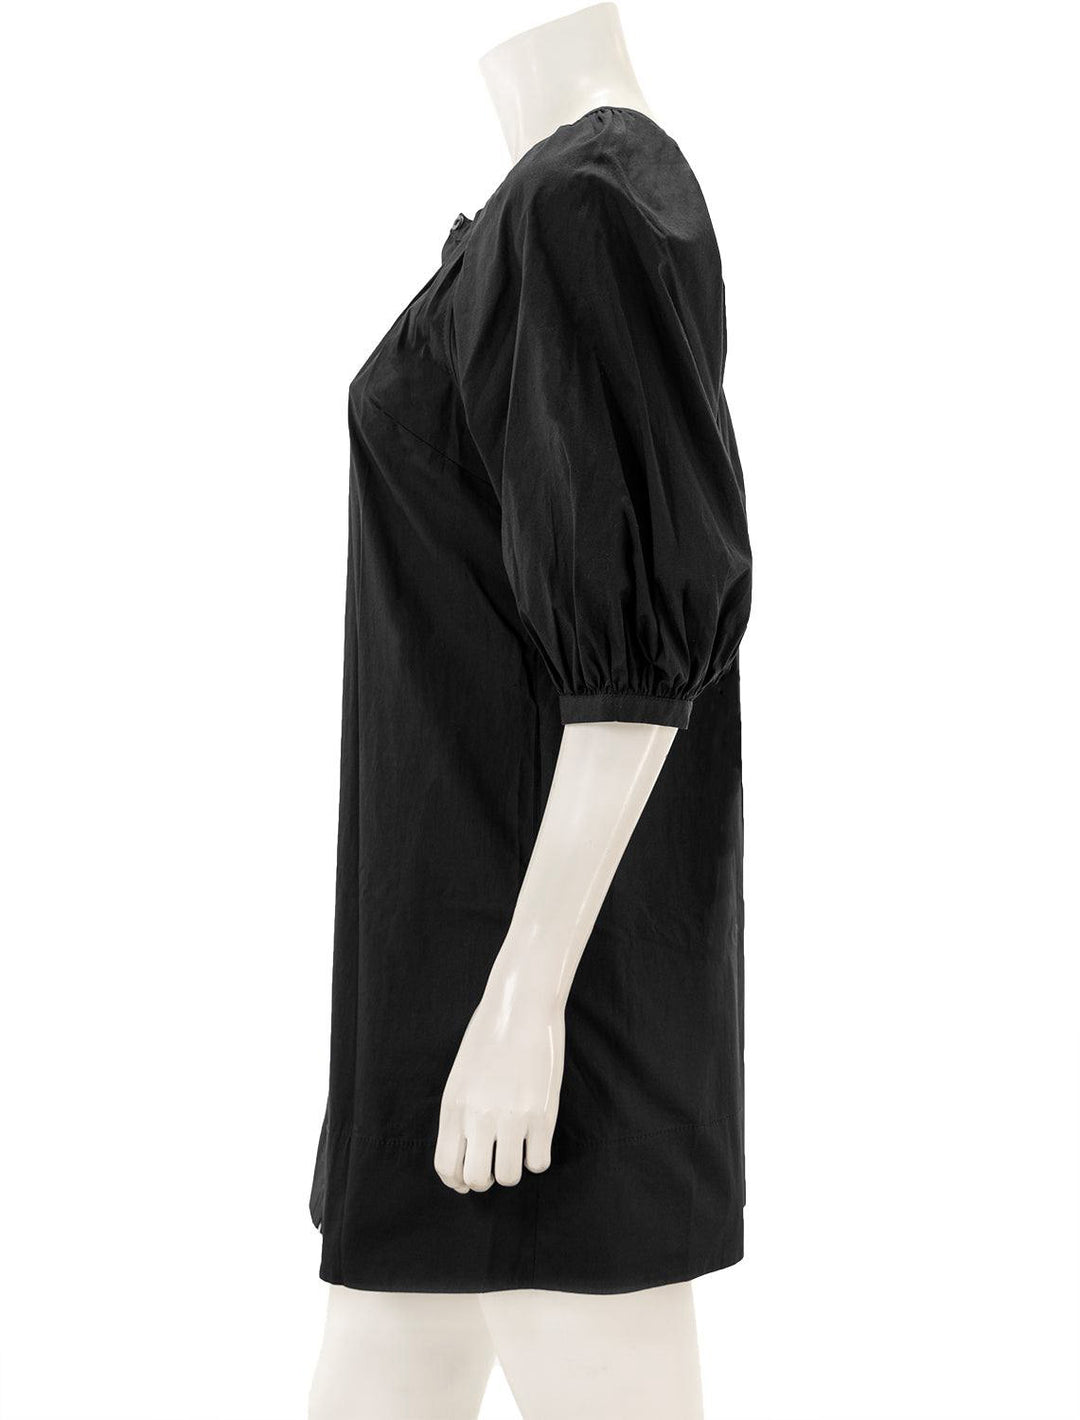 Side view of Staud's mini vincent dress in black.